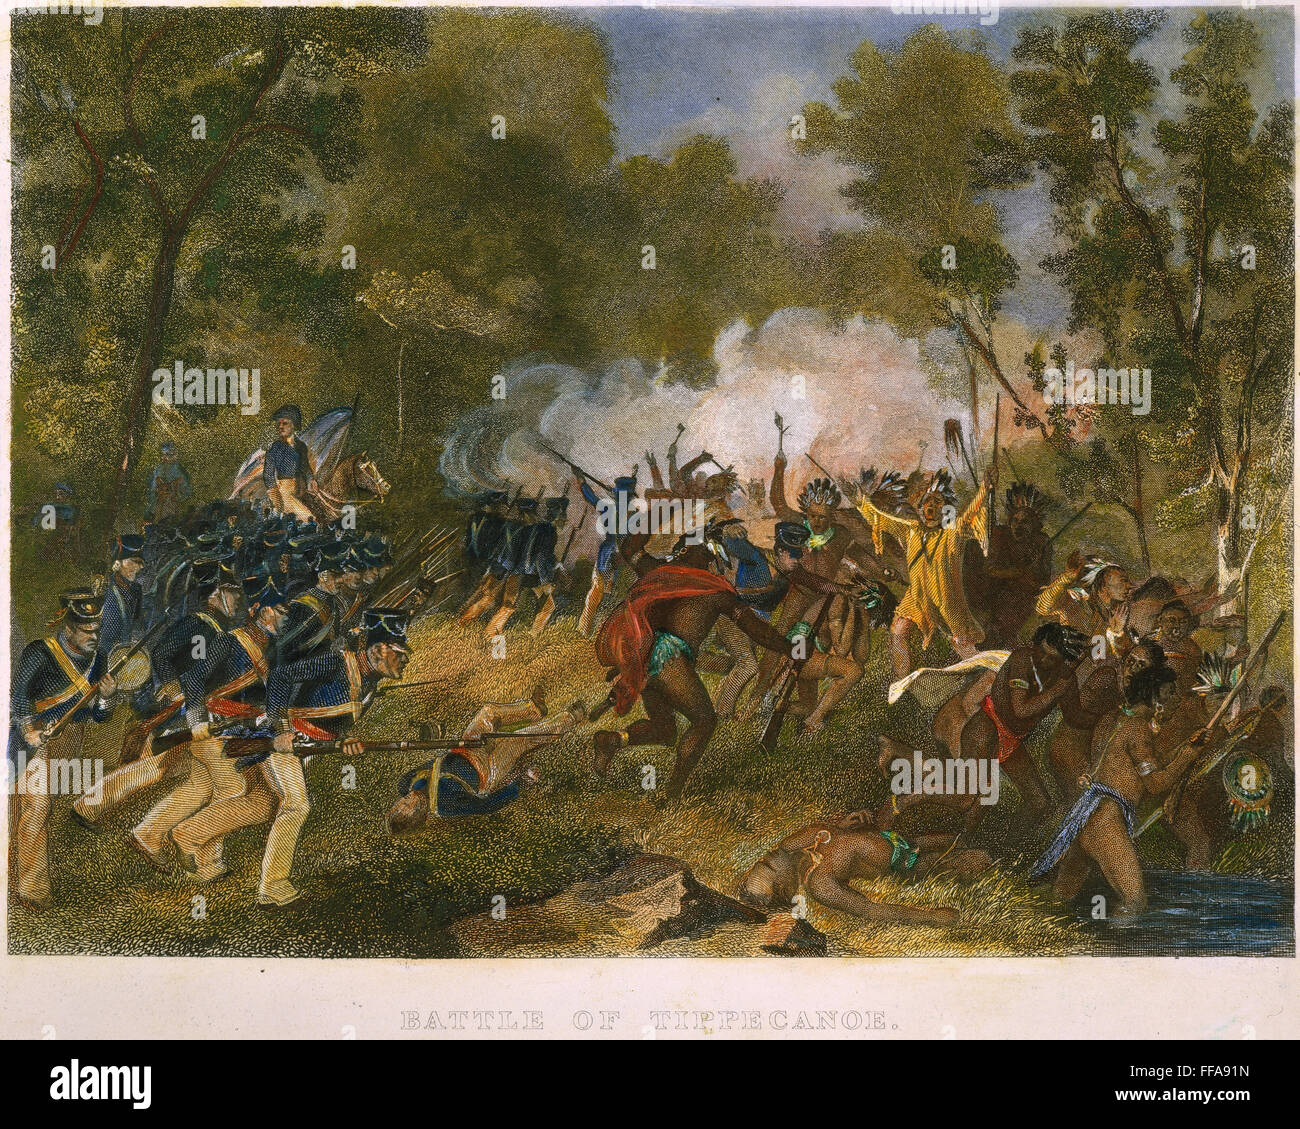 BATTLE OF TIPPECANOE, 1811. /nA U.S. force under General William Henry Harrison defeats Native Americans under Tenskwatawa, the 'Prophet', brother of Tecumseh, 7 November 1811. Colored engraving, 19th century. Stock Photo